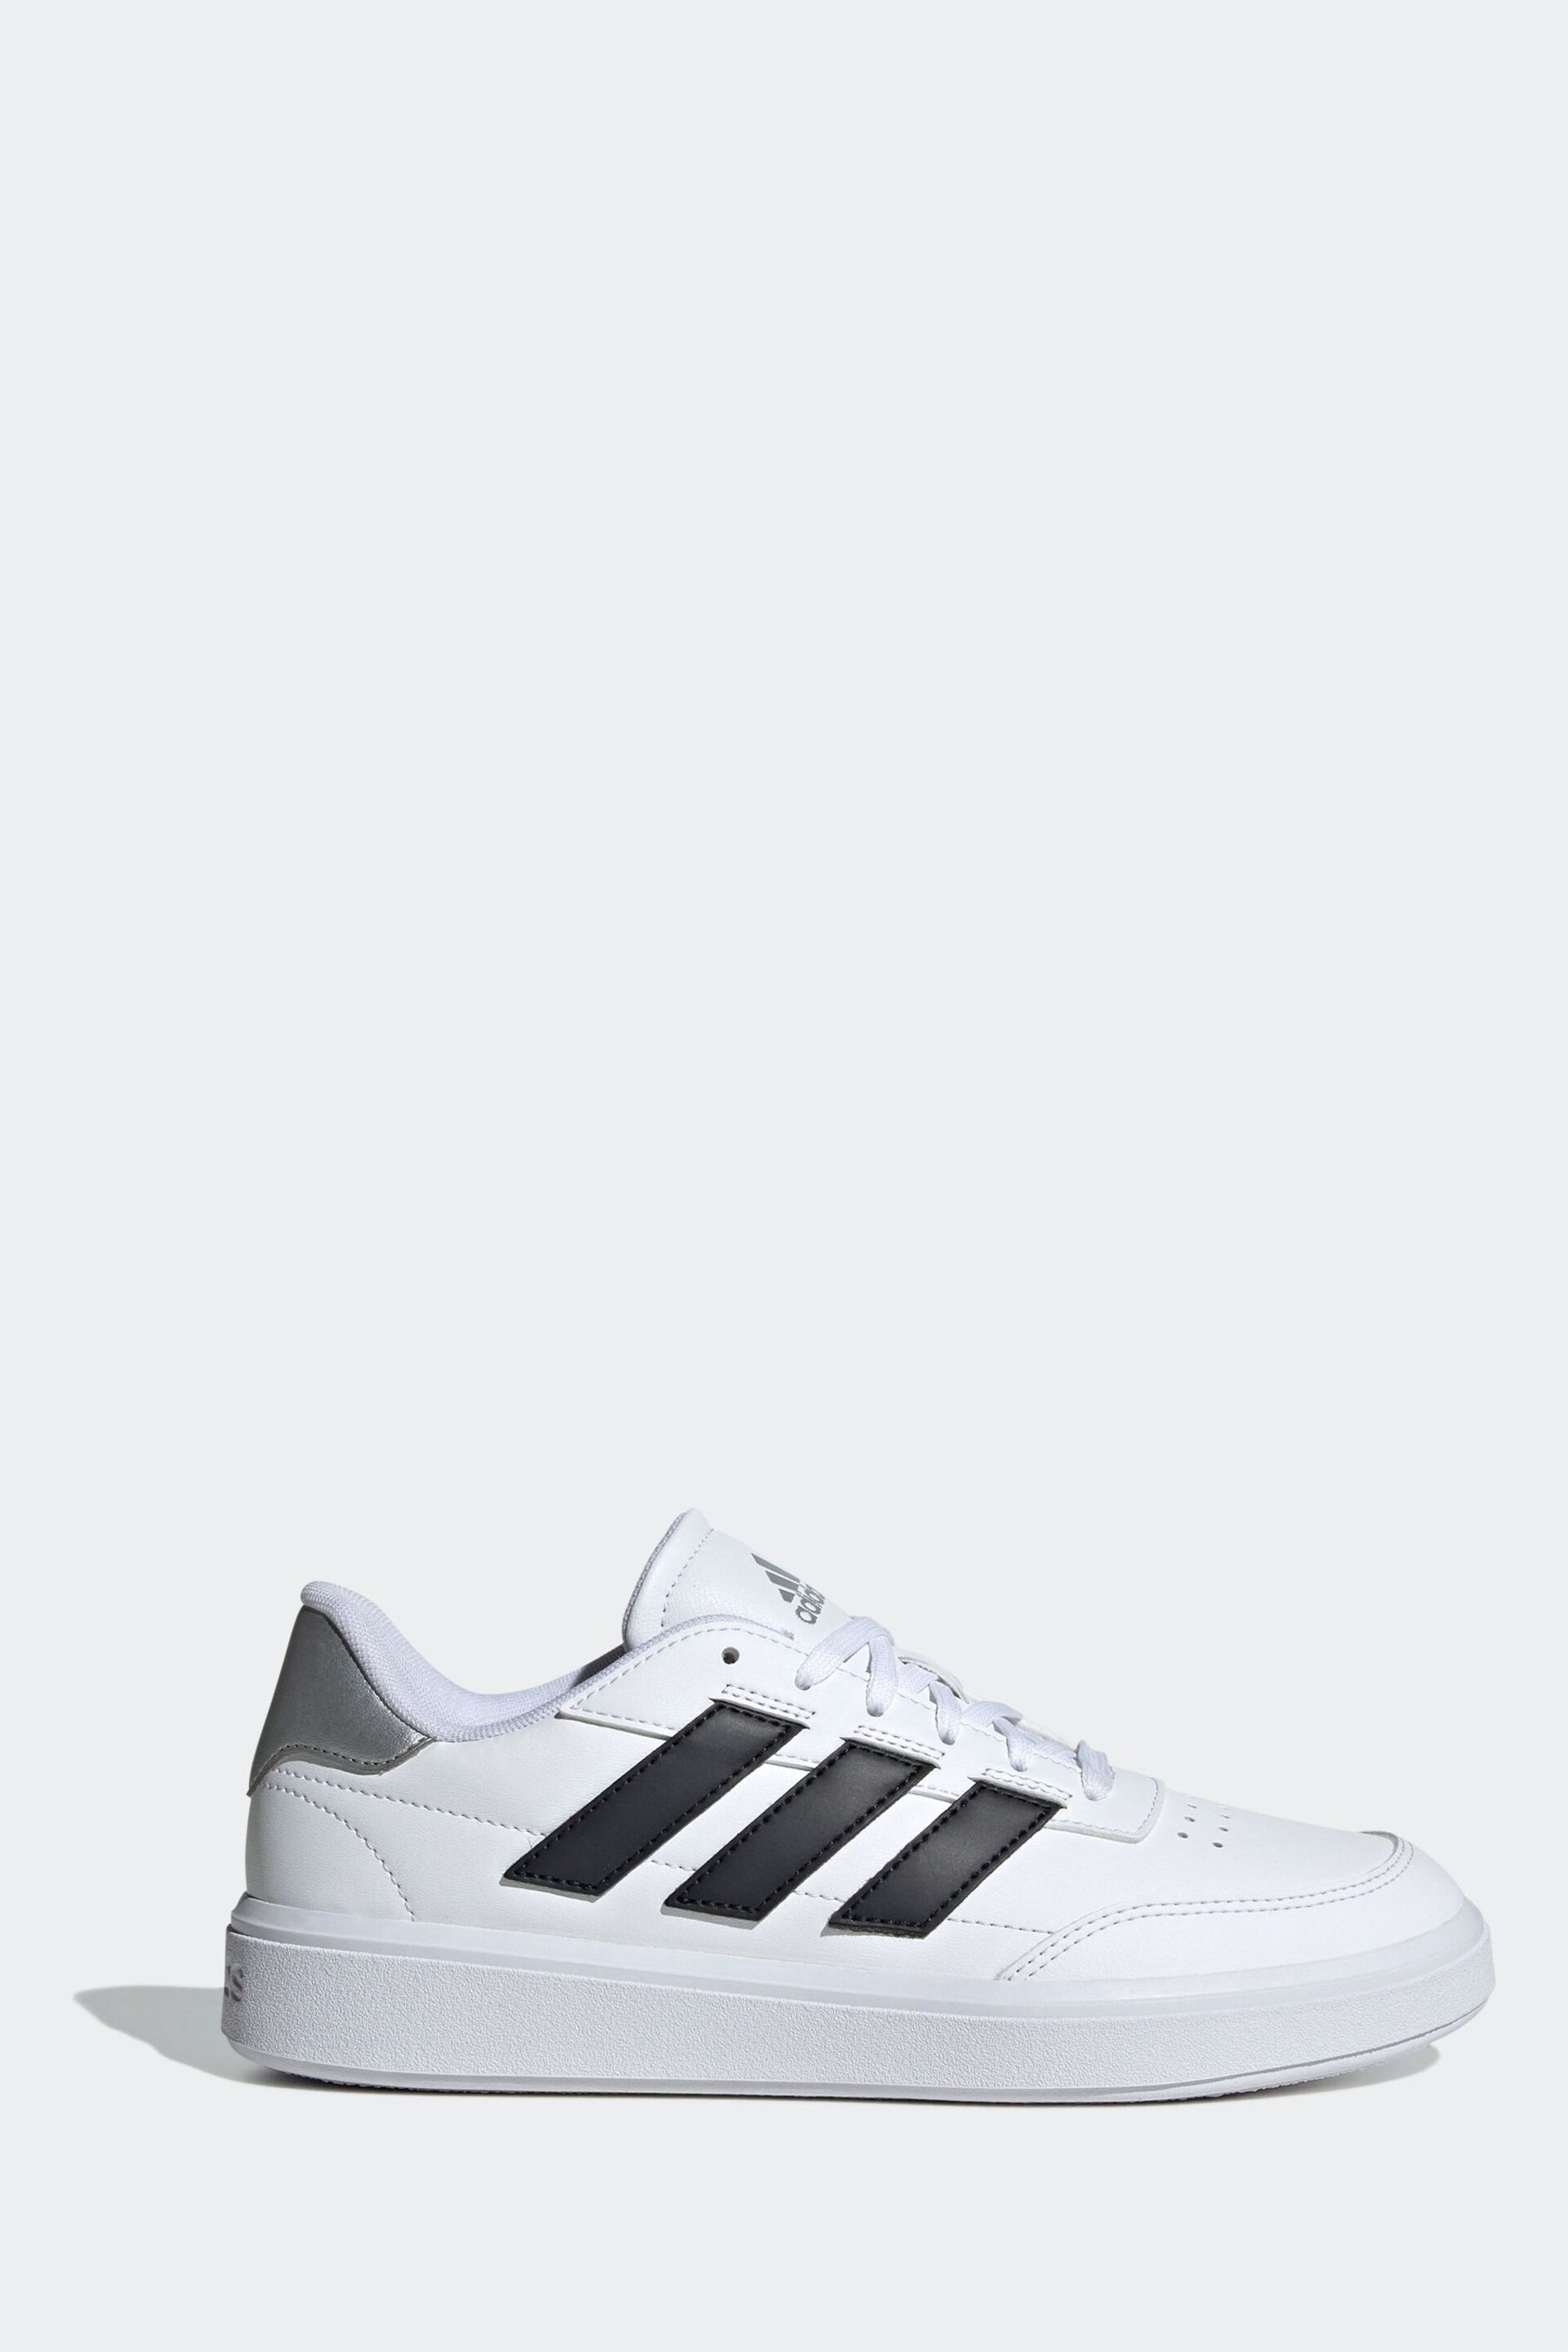 adidas White Court Block Trainers - Image 1 of 9